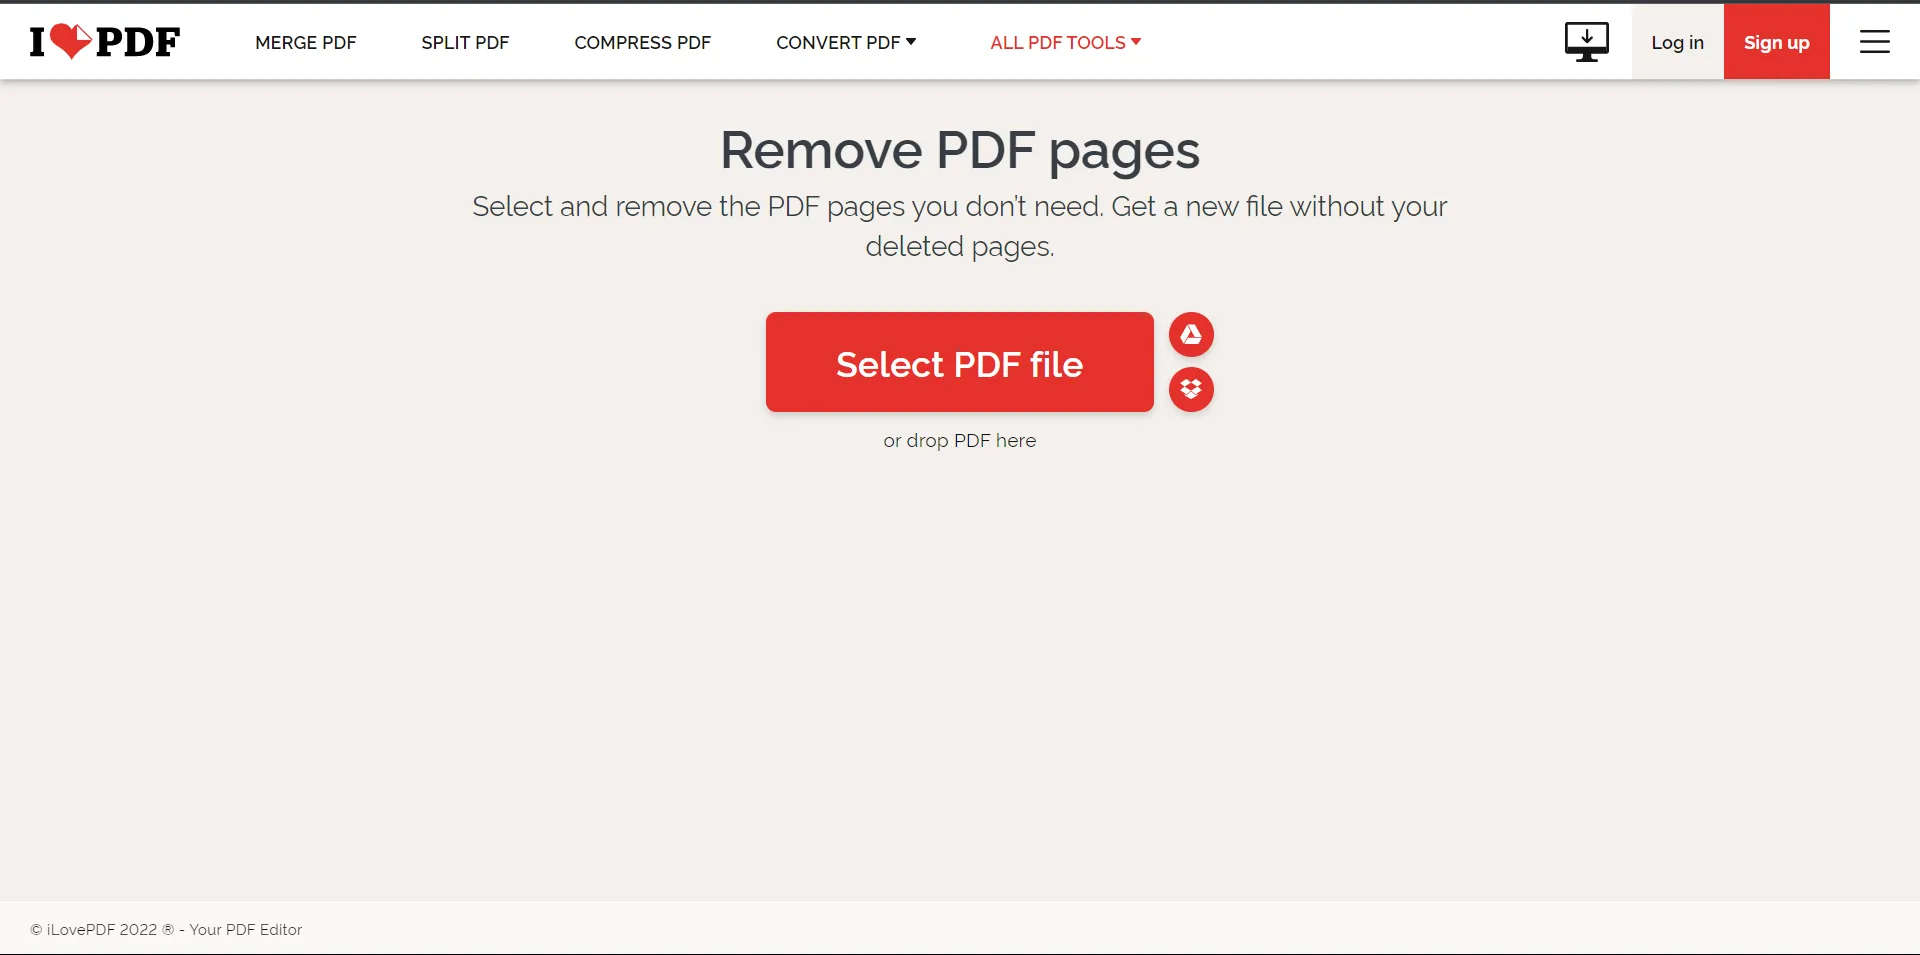 How to Delete a Page in PDF Documents, Figure 11: Remove PDF pages from ILovePDF